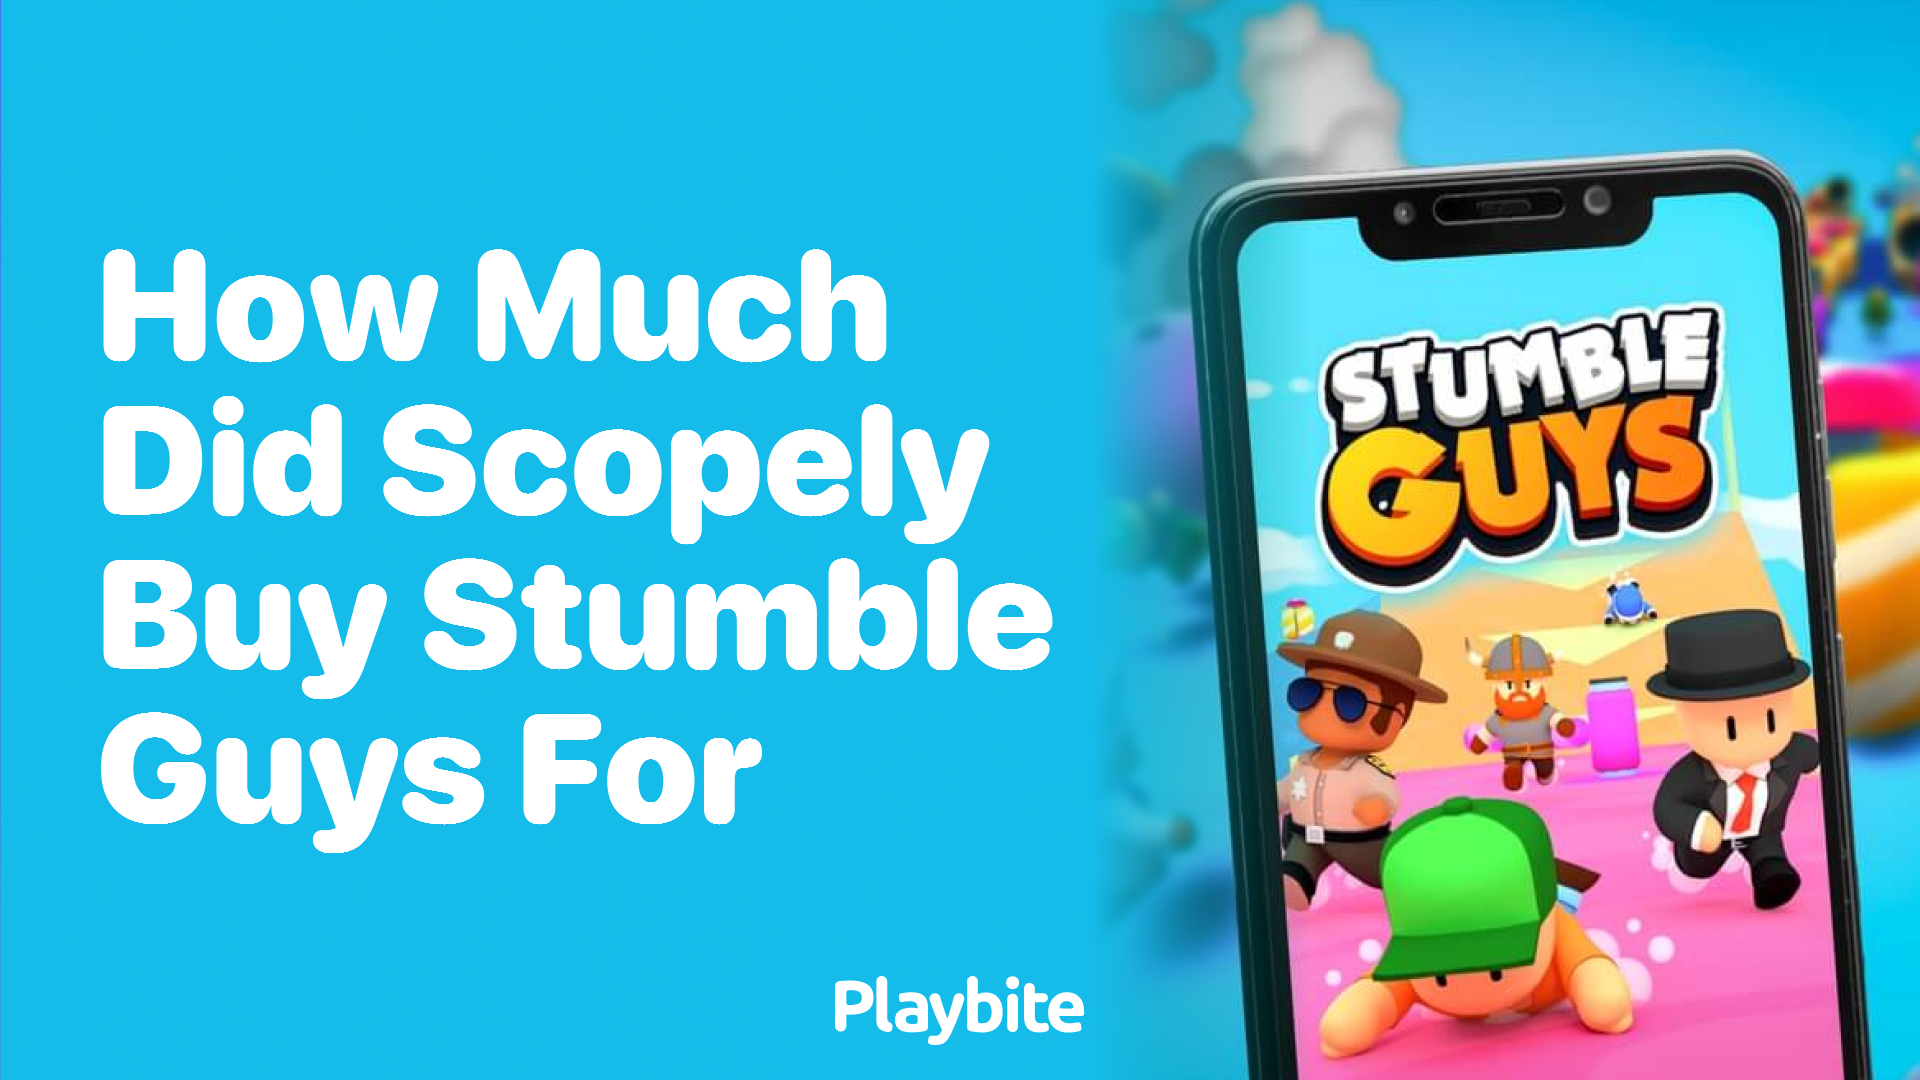 How Much Did Scopely Buy Stumble Guys For?